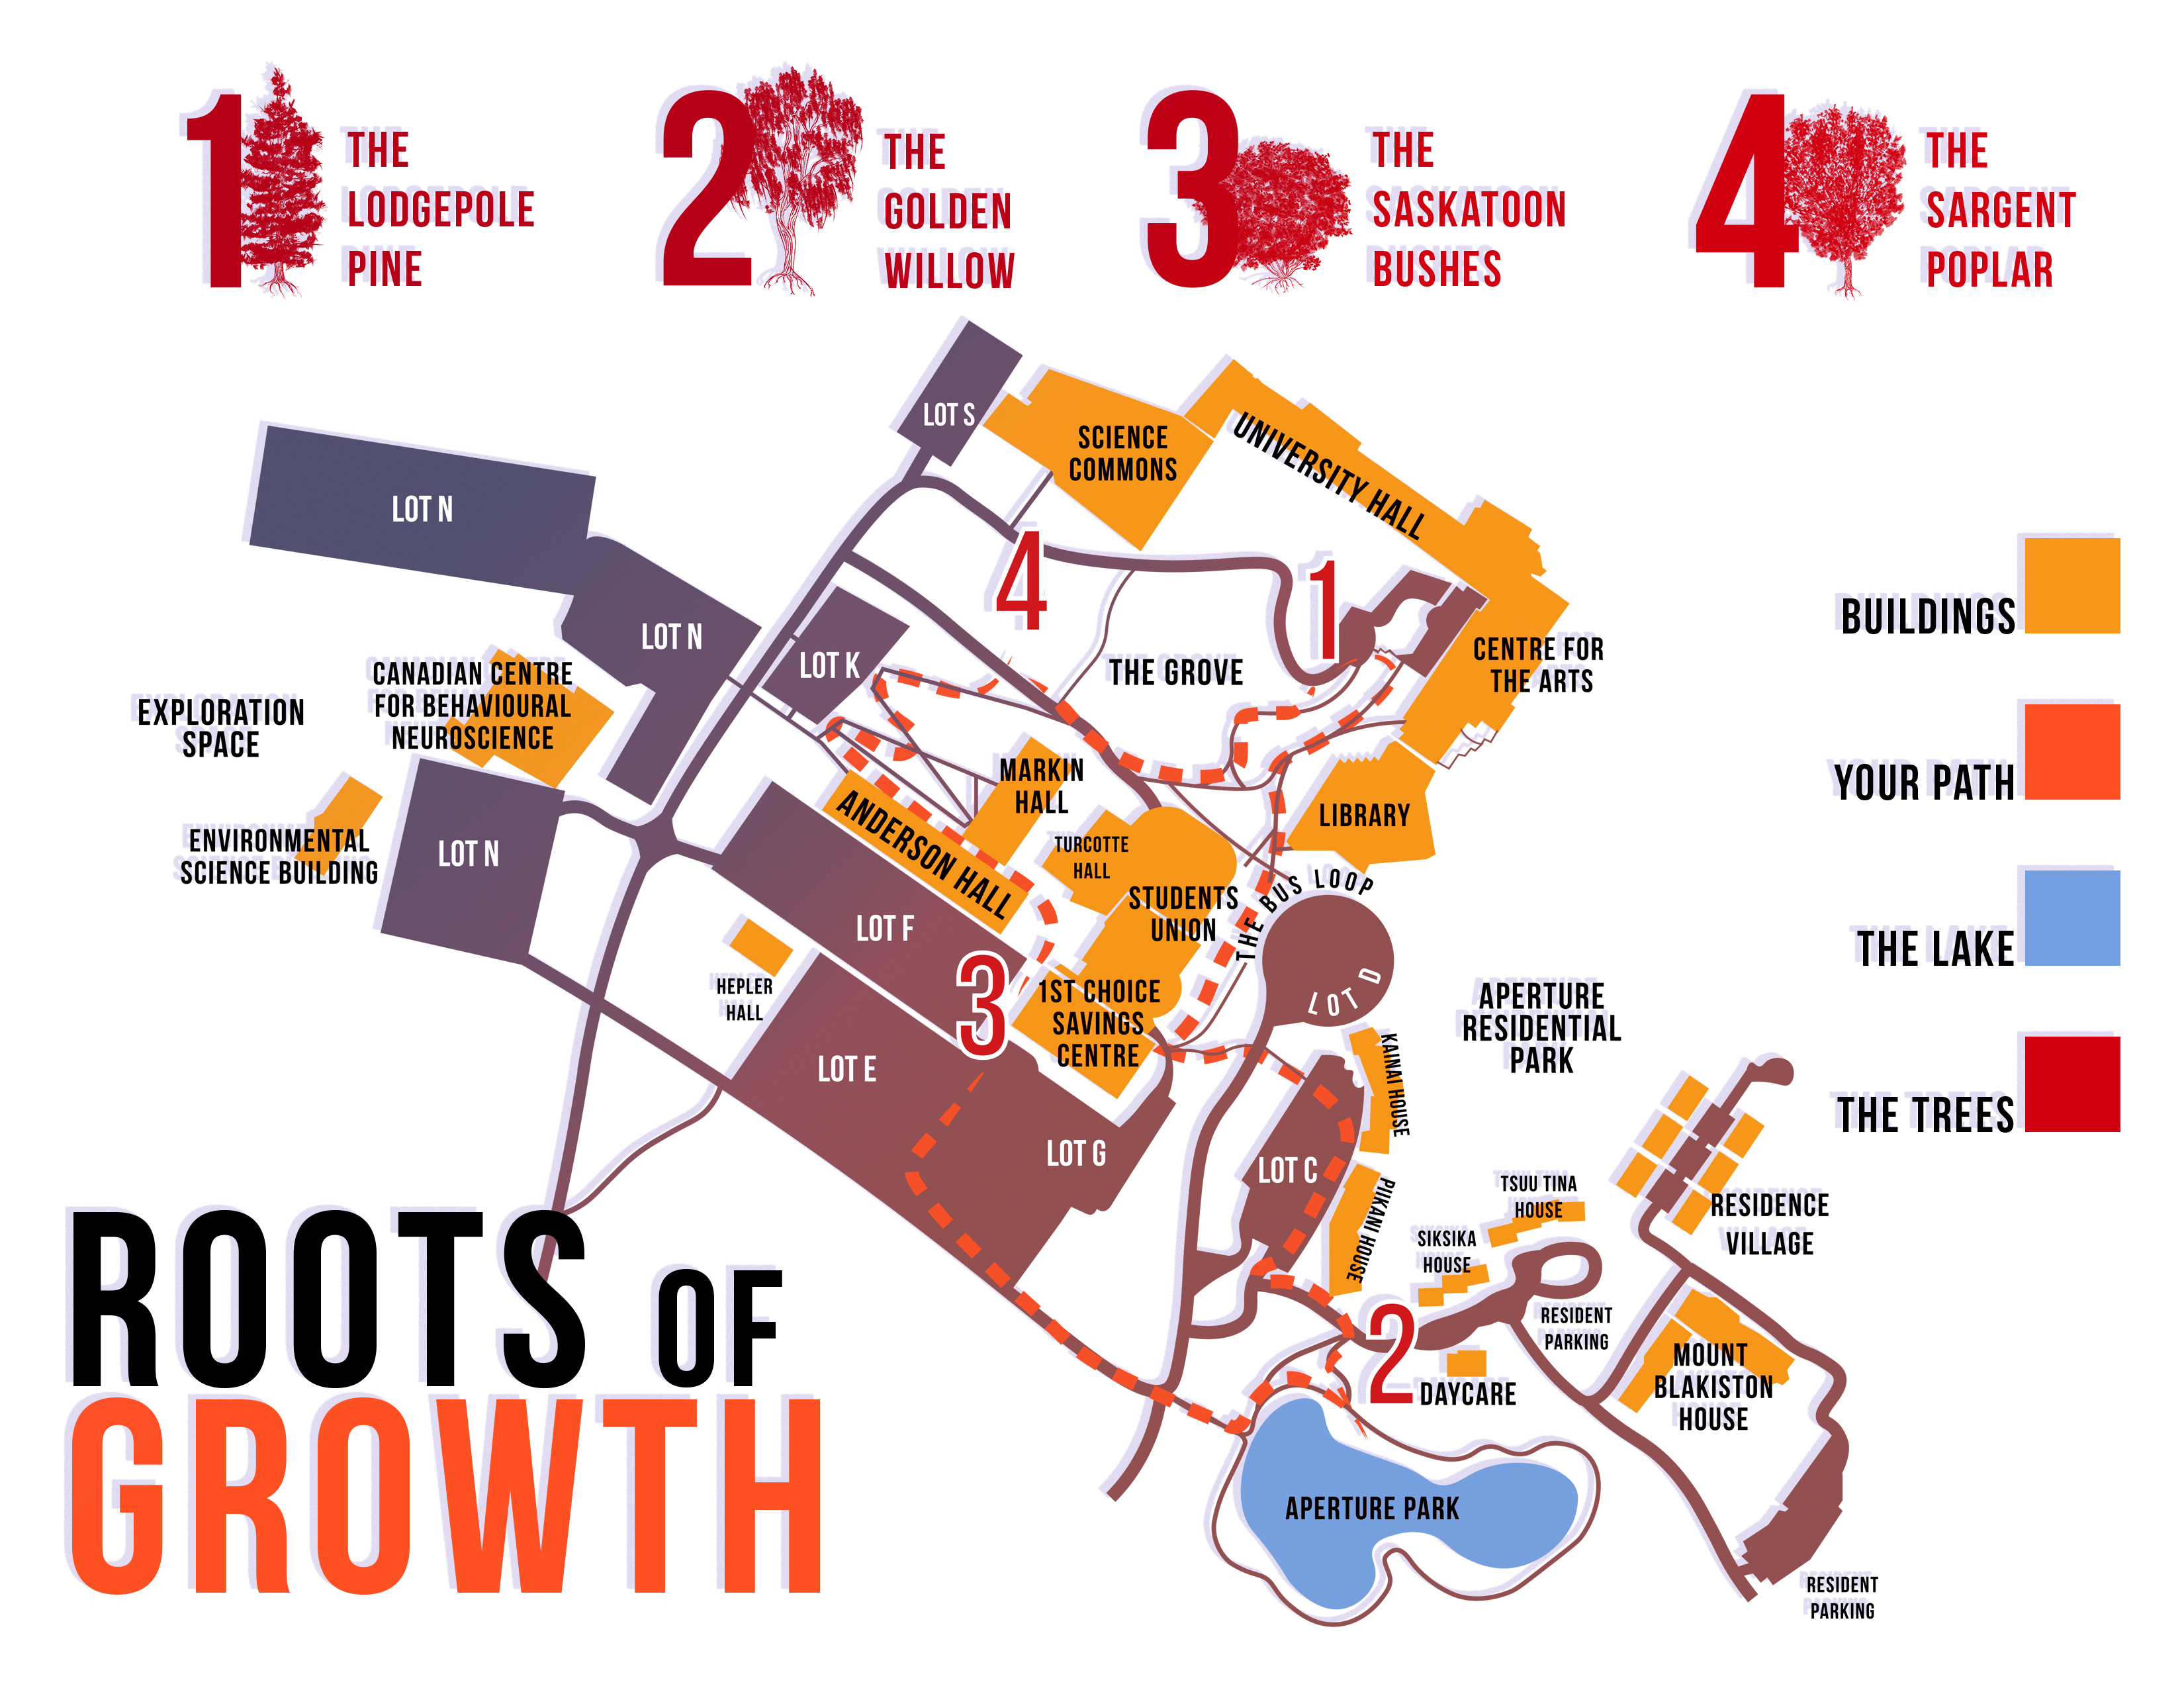 Roots of Growth - Tree Map